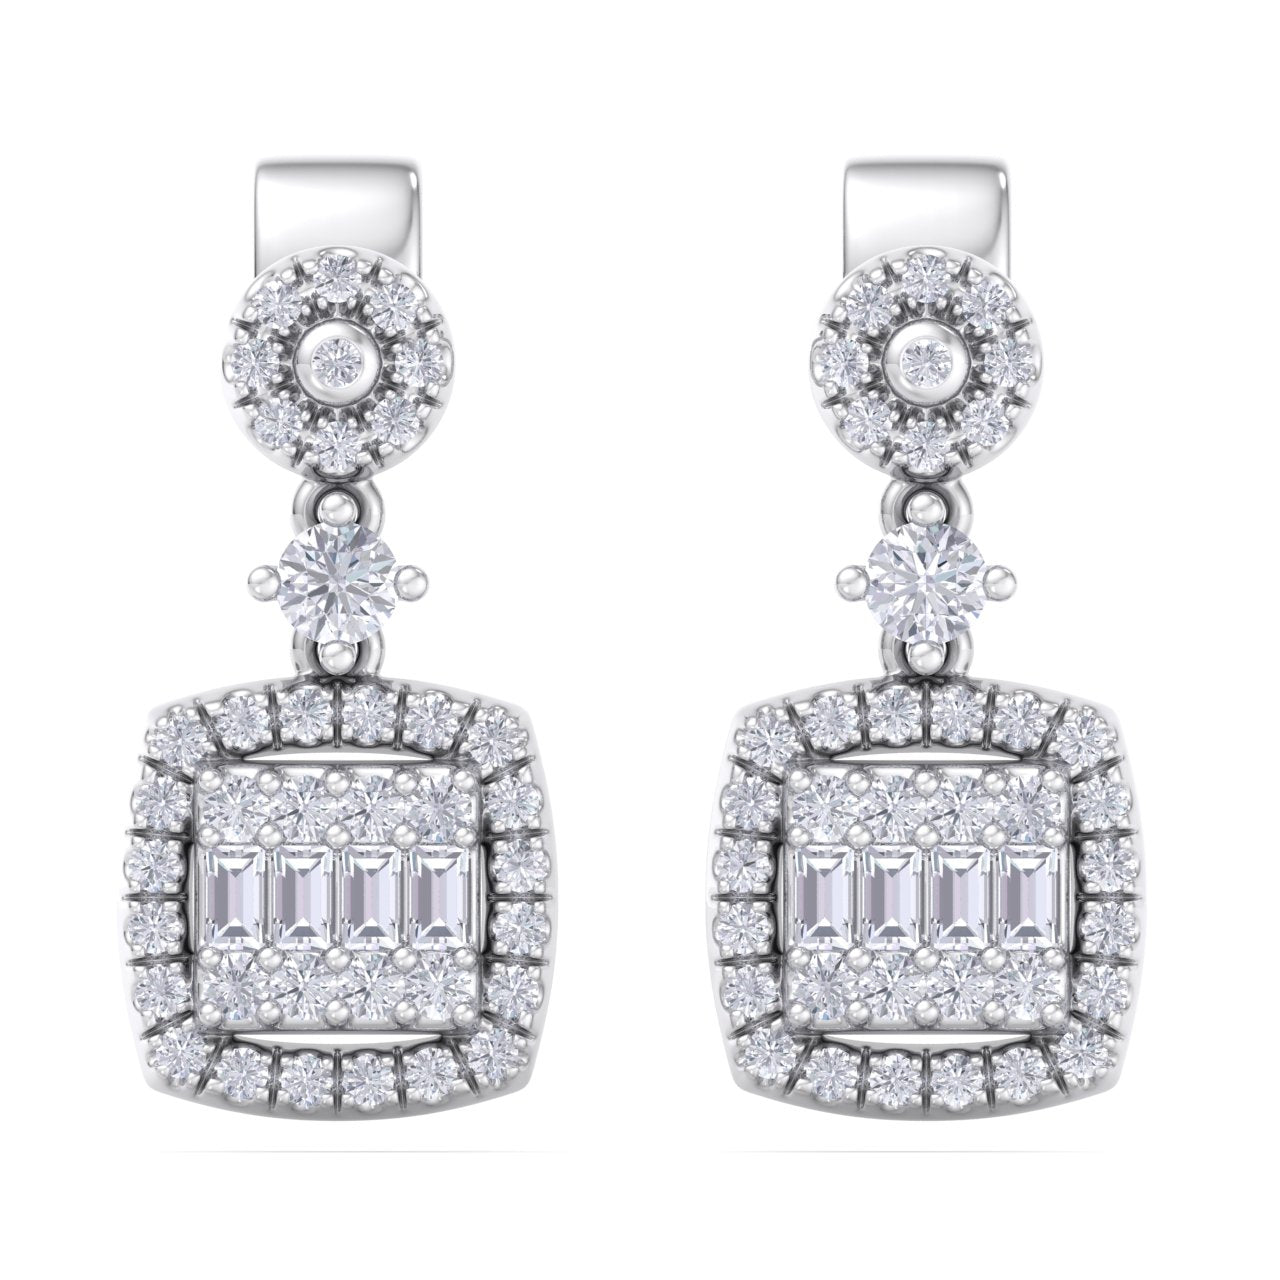 Drop earrings in rose gold with white diamonds of 0.61 ct in weight